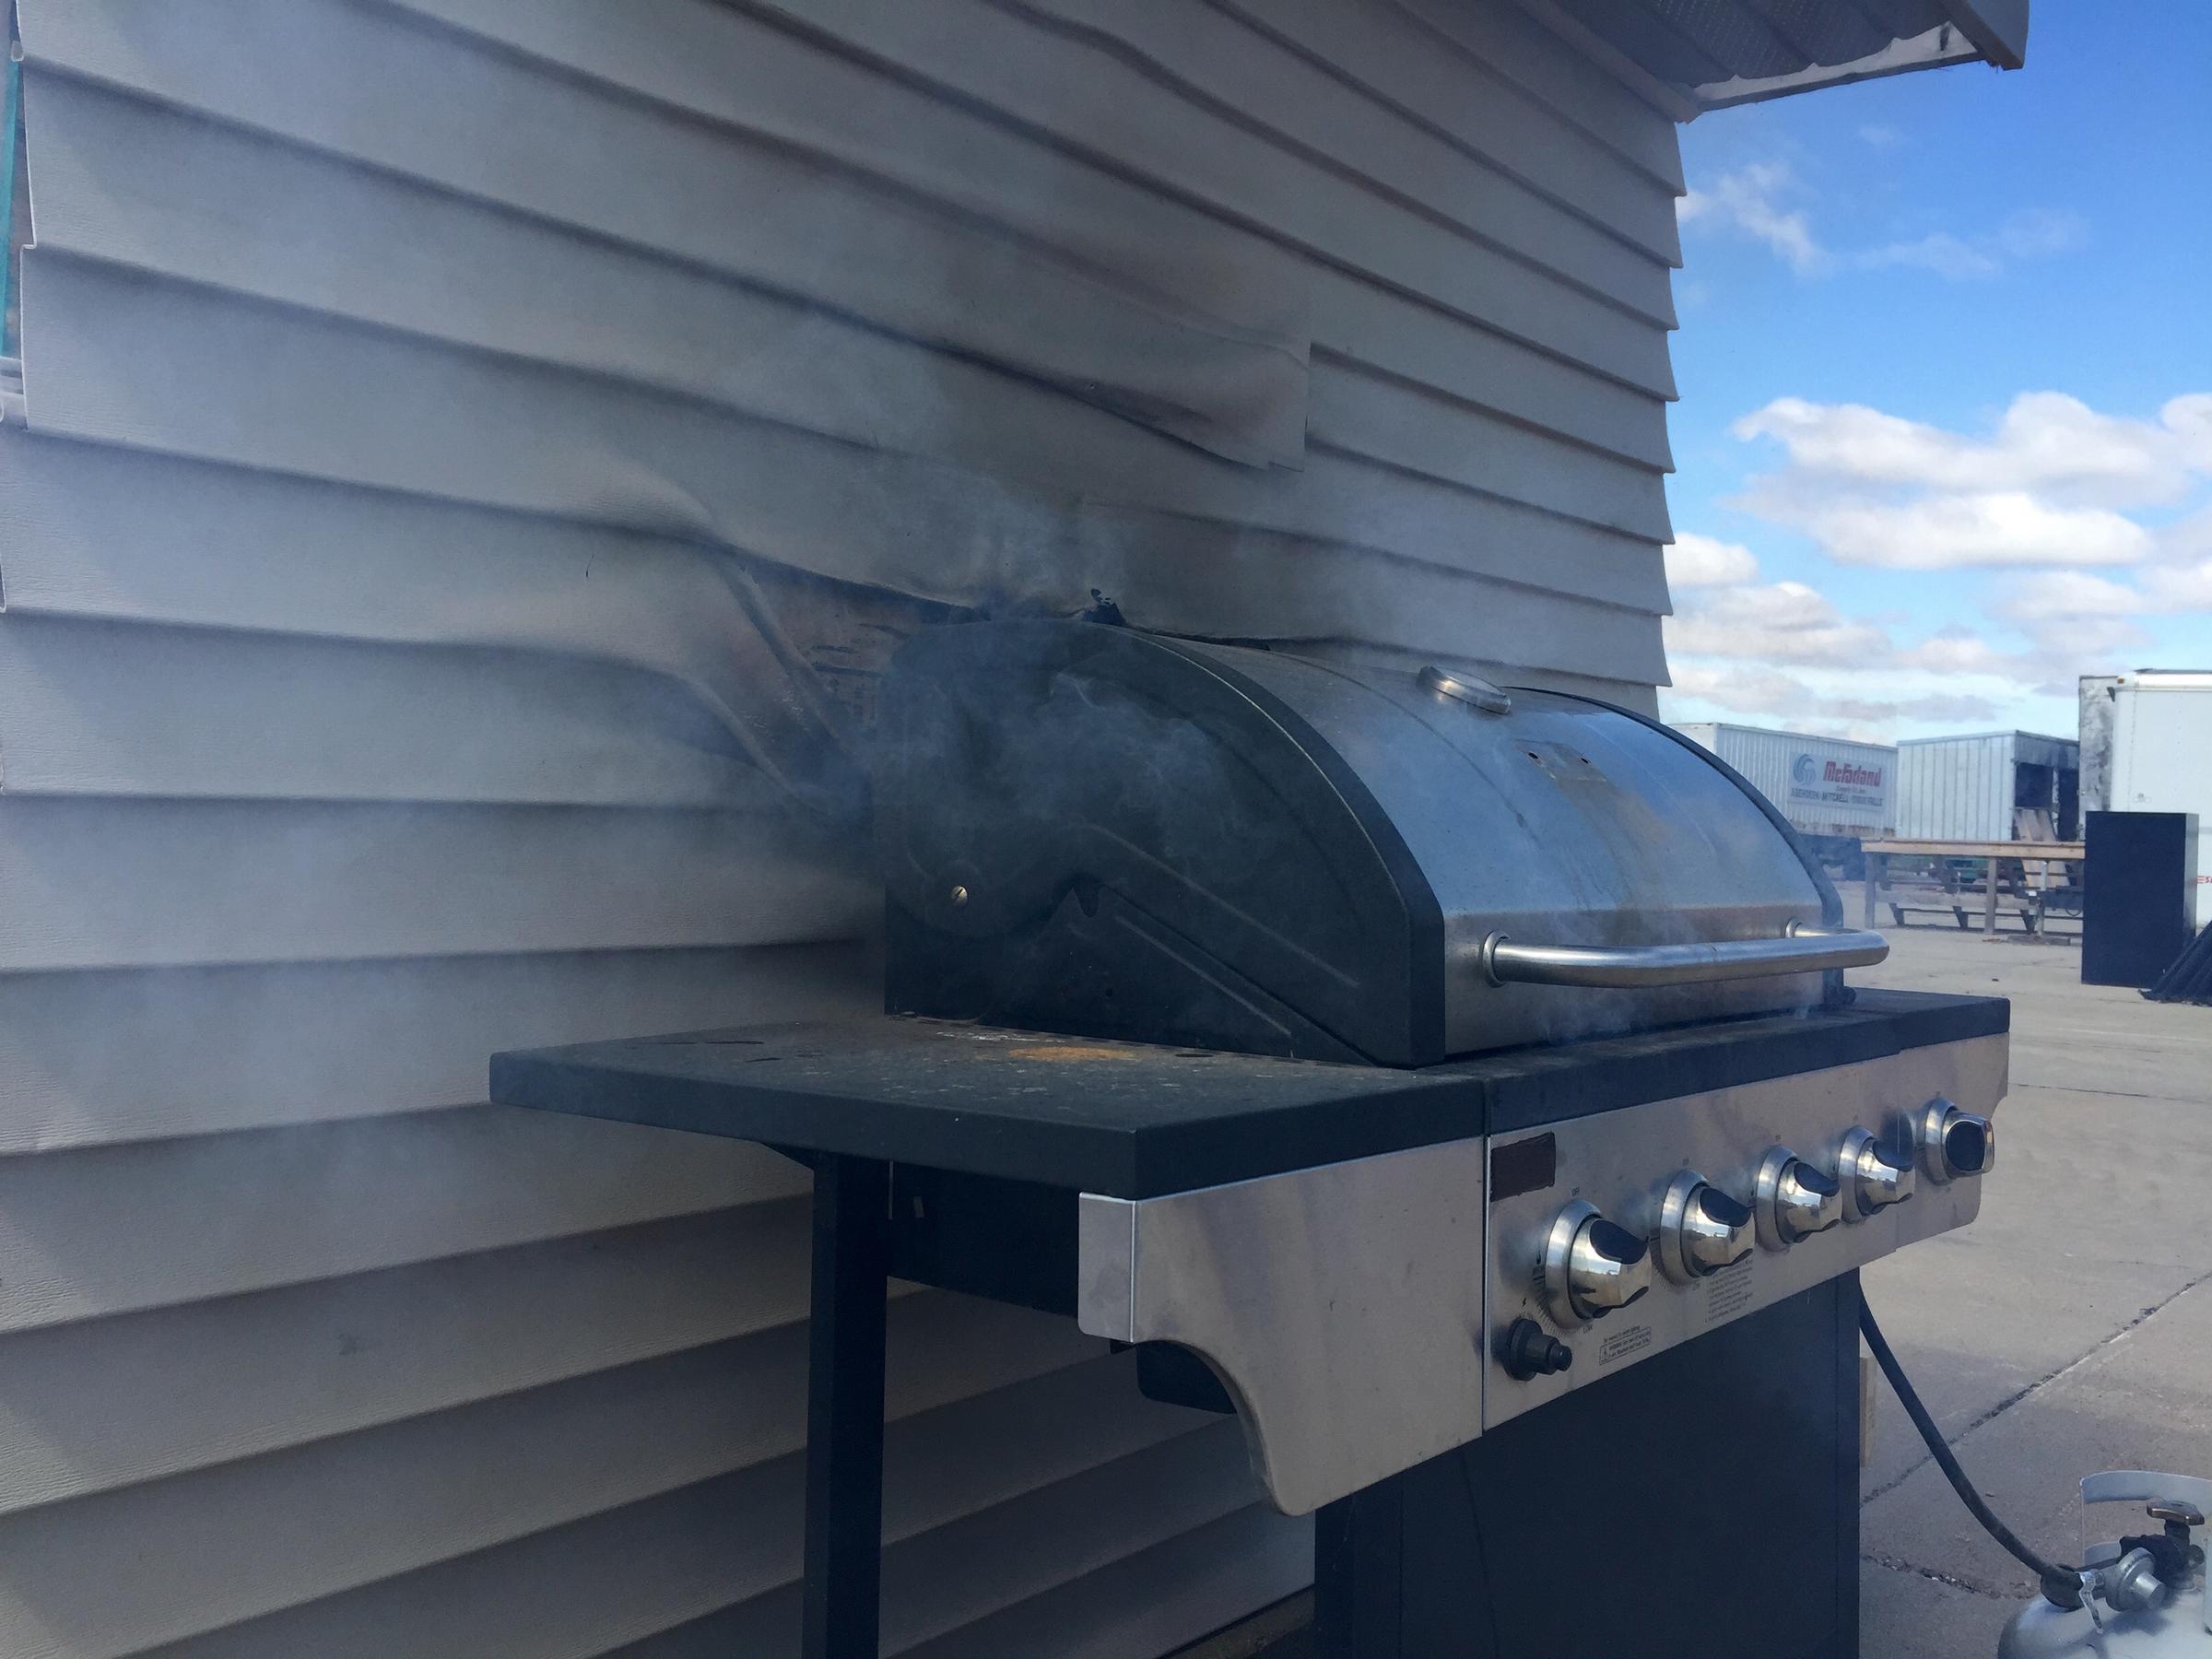 How To Protect Siding From Grill Heat